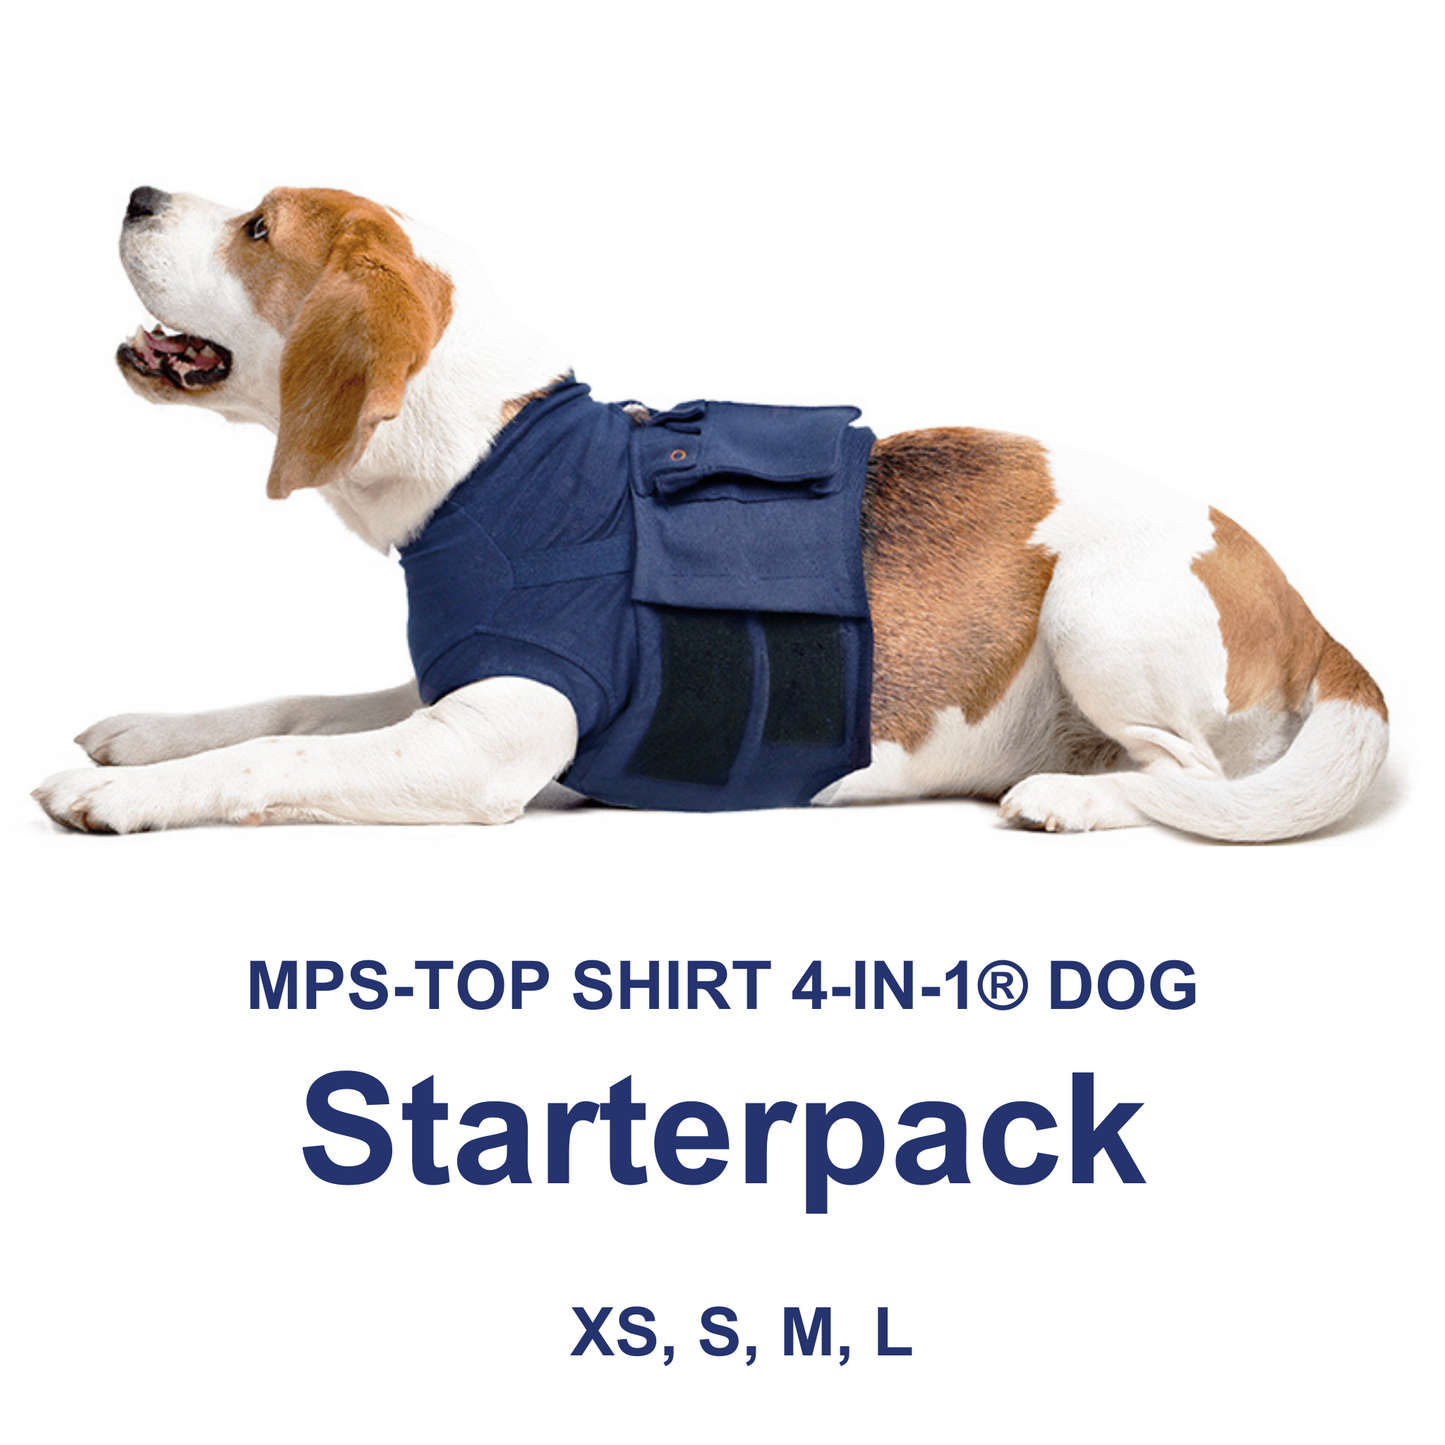 MPS-TOP SHIRT 4-IN-1® DOG Starterpacks